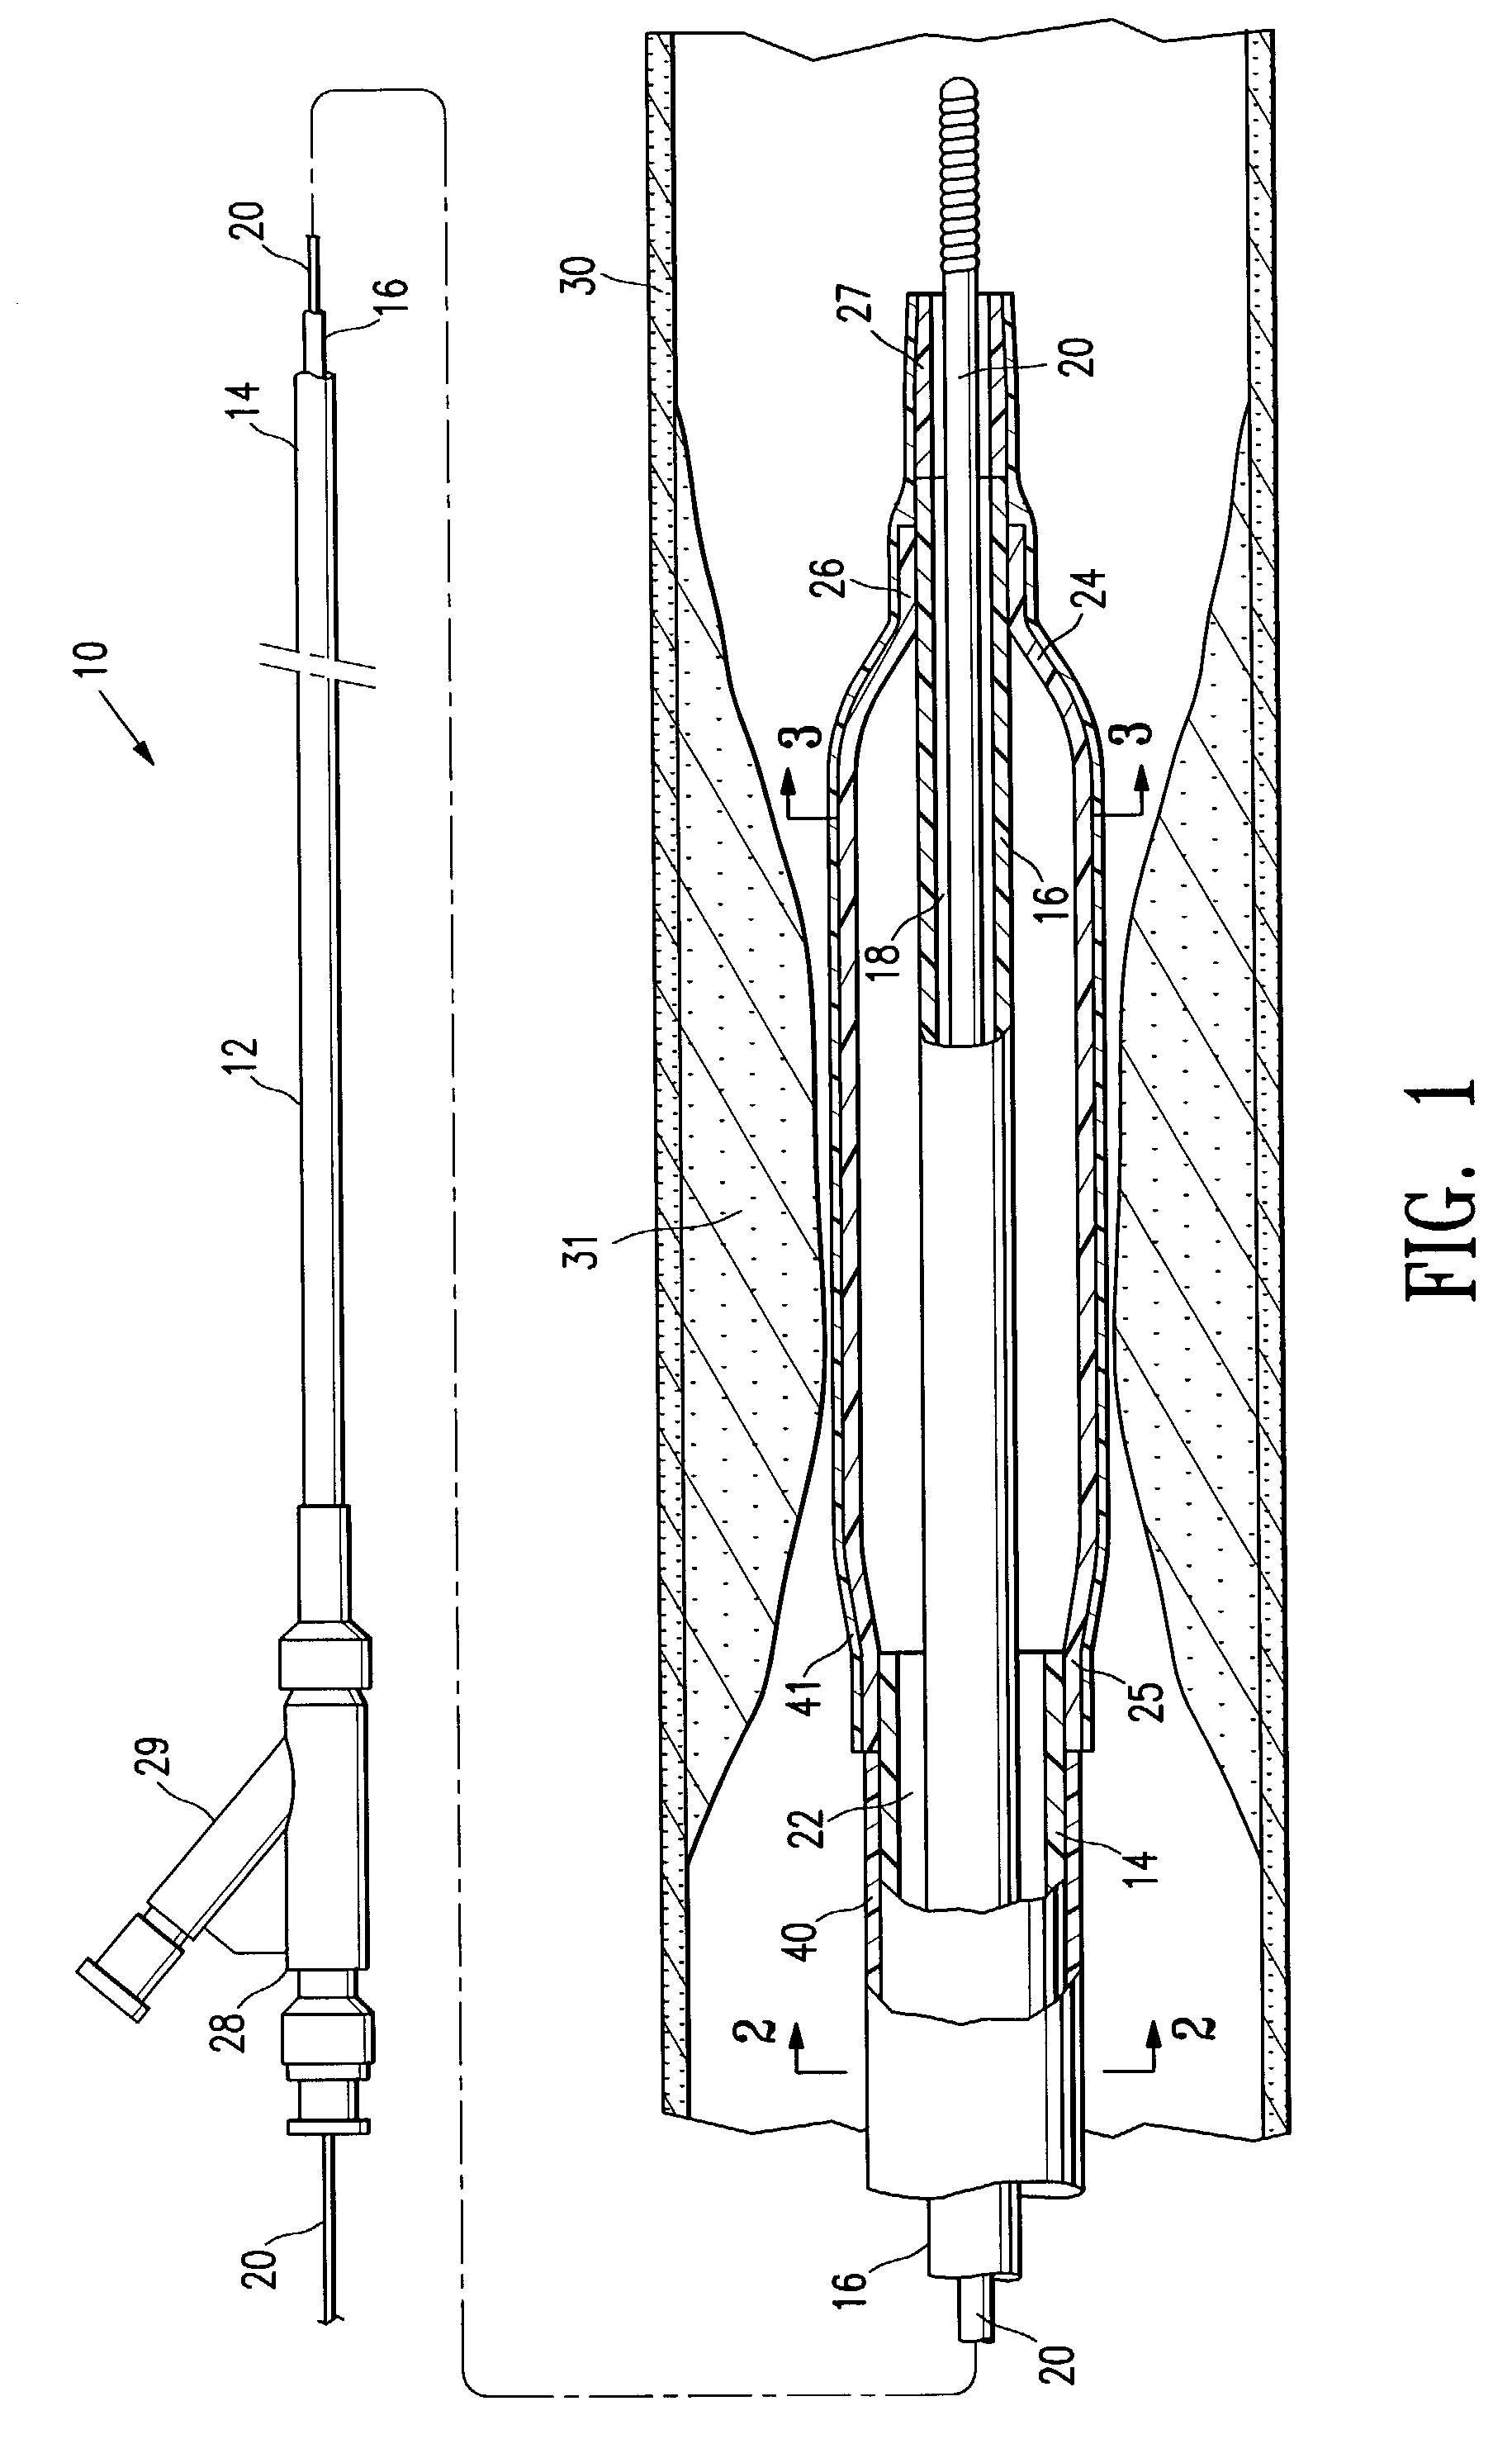 Reduced slippage balloon catheter and method of using same